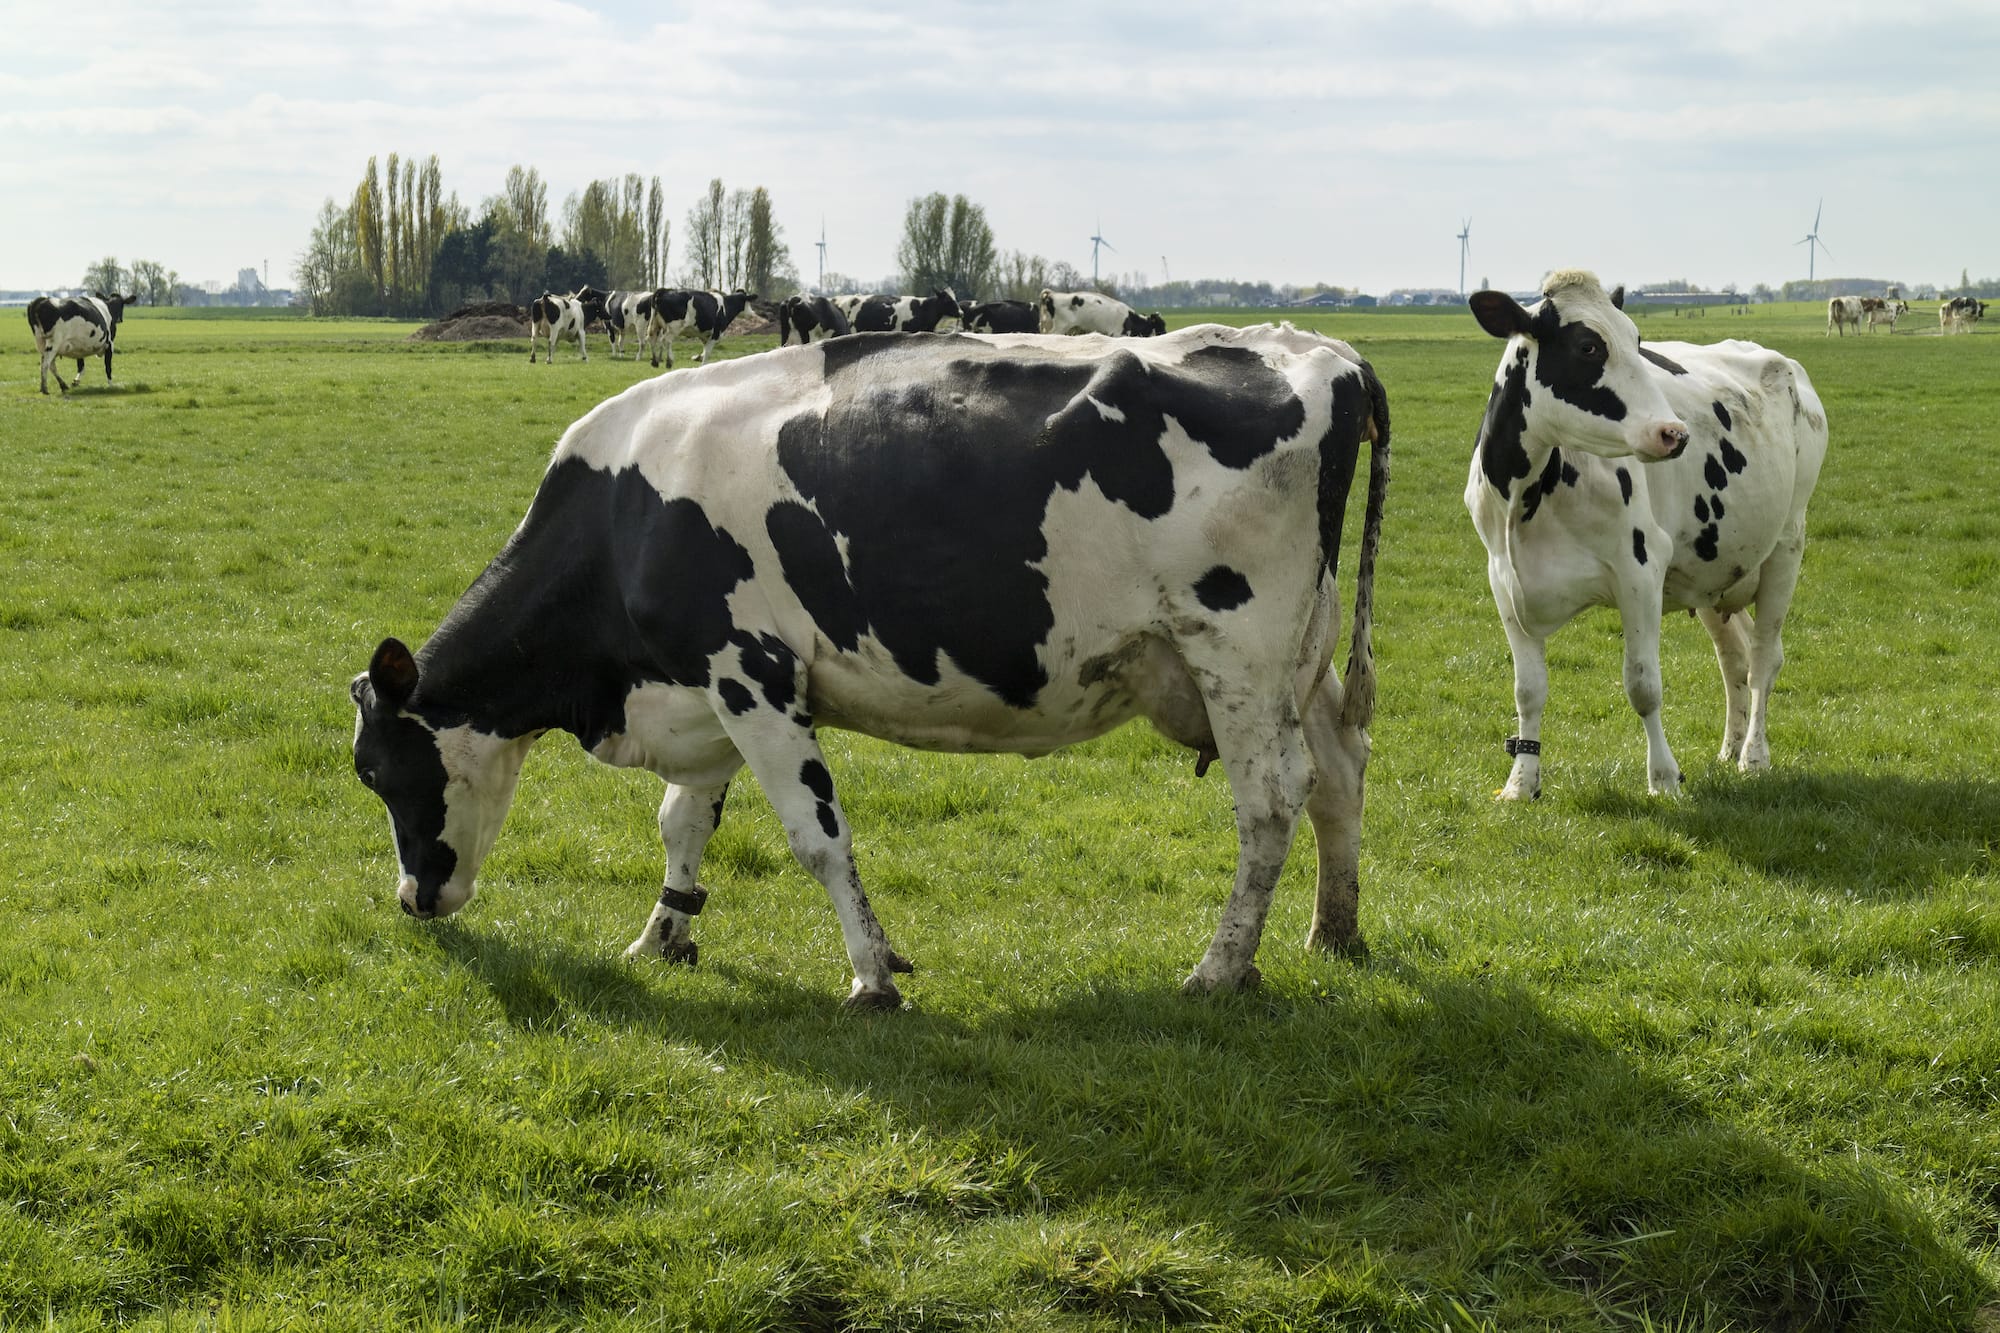 Rotational grazing also improves the palatability of your pasture and reduces pasture wastage